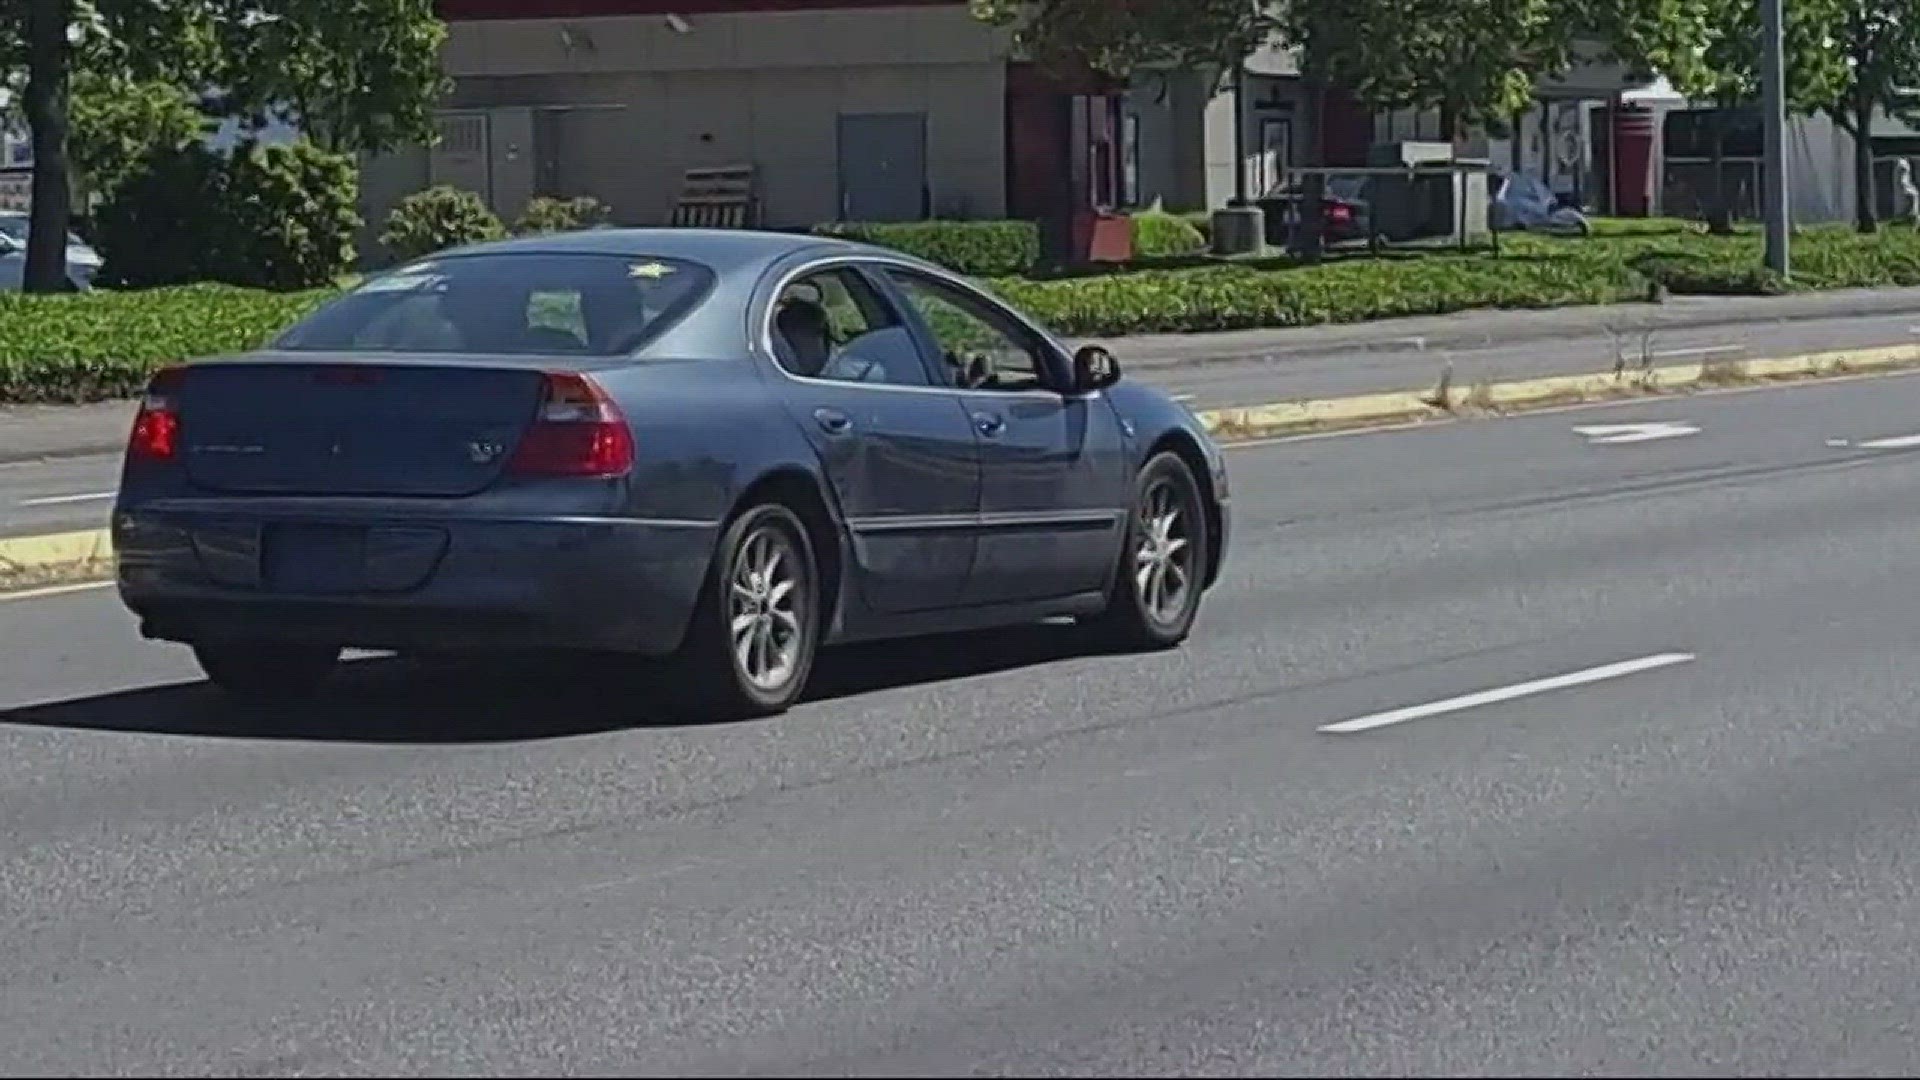 Police searching for Lowe's hit-and-run driver